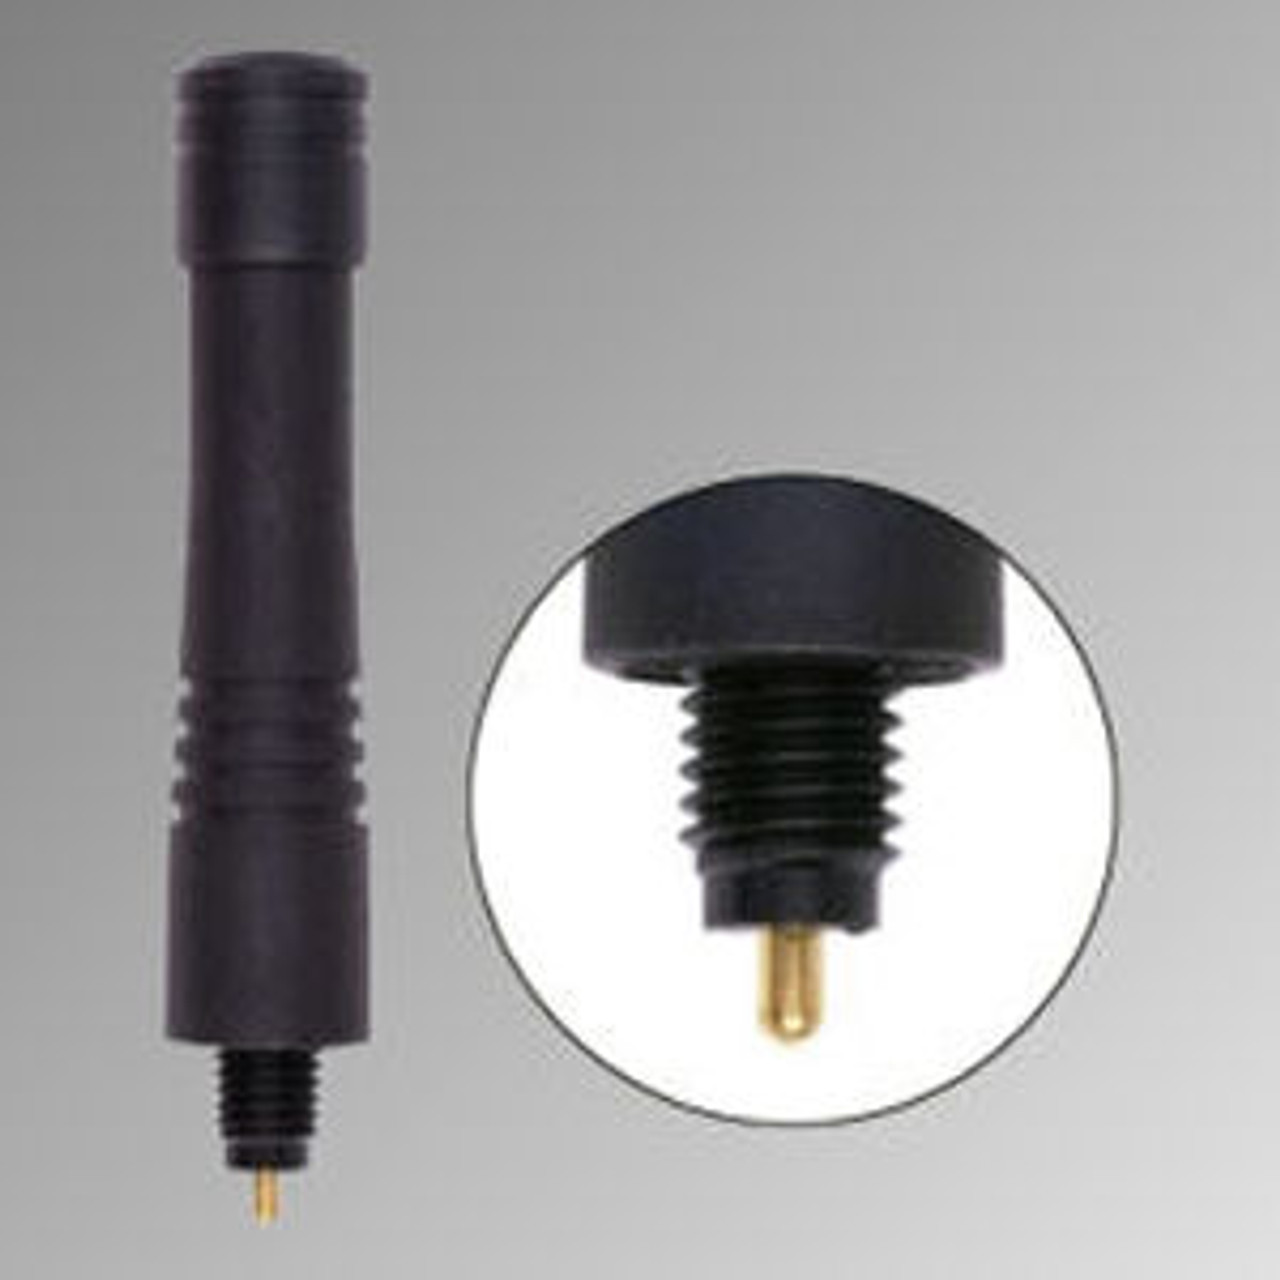 Replacement For M/A-Com KRE1011219/10 Antenna - 3", UHF, 400-420 MHz